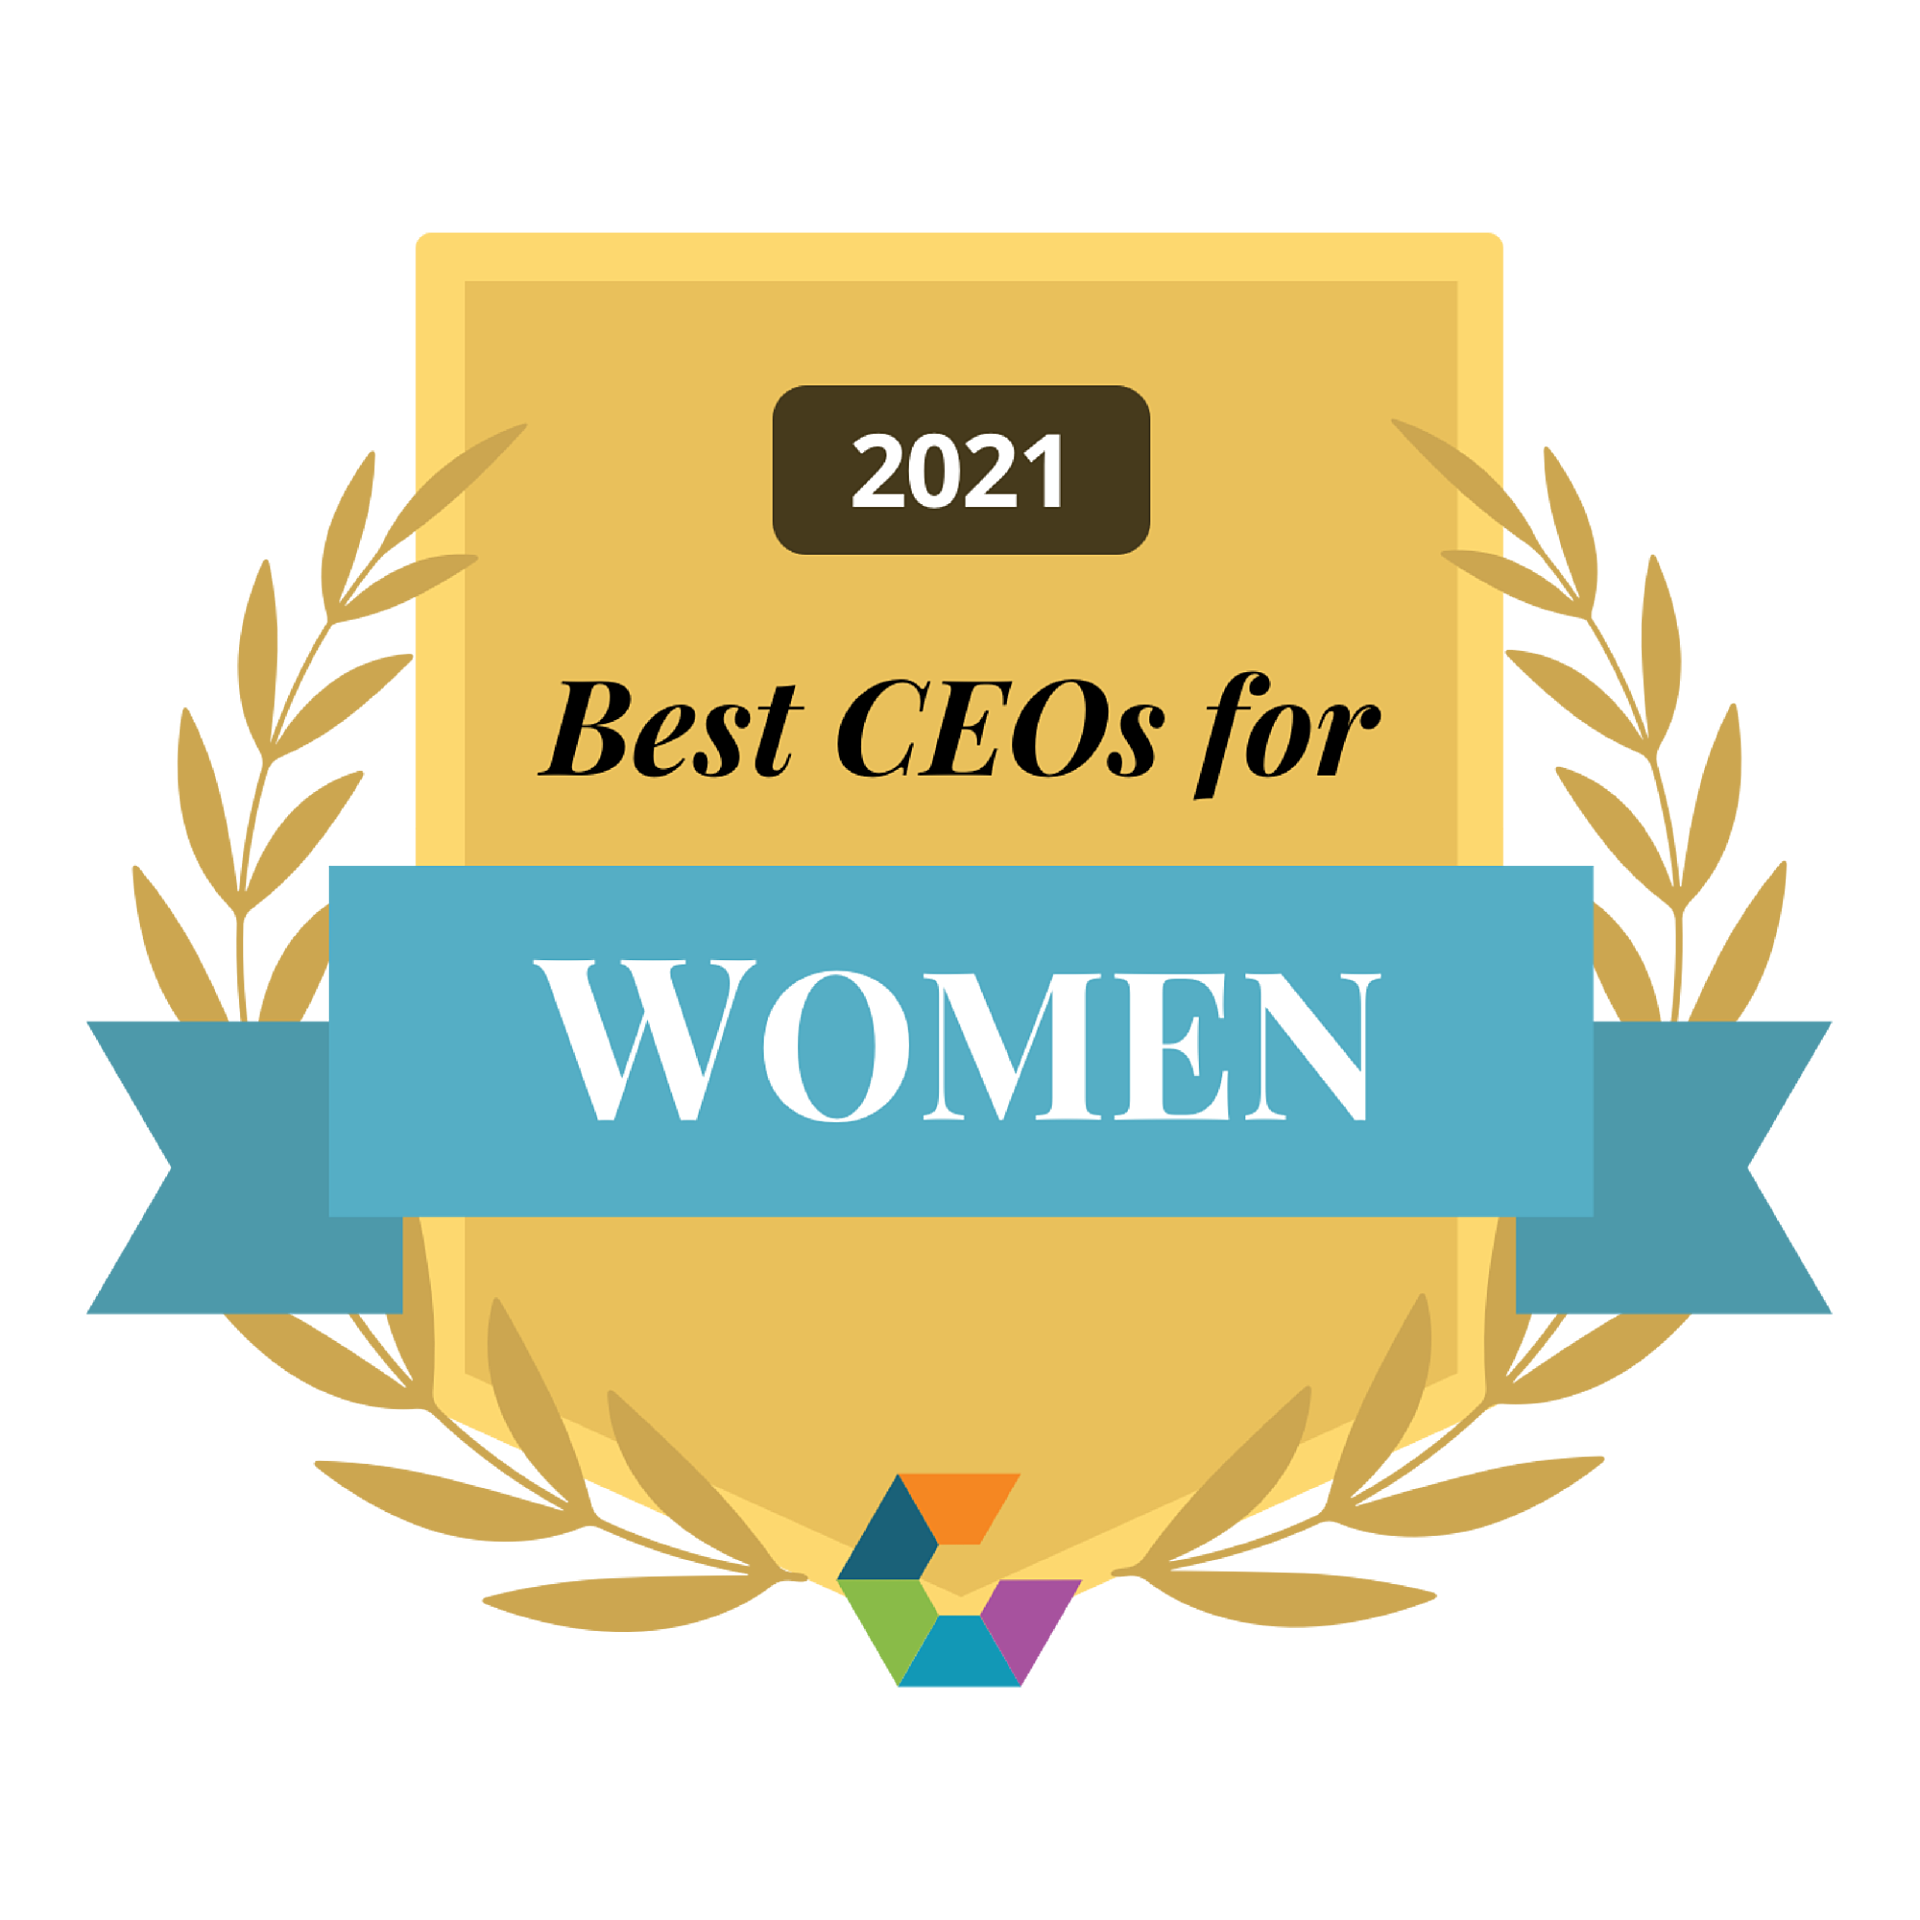 Comparably Award Best CEO for Women